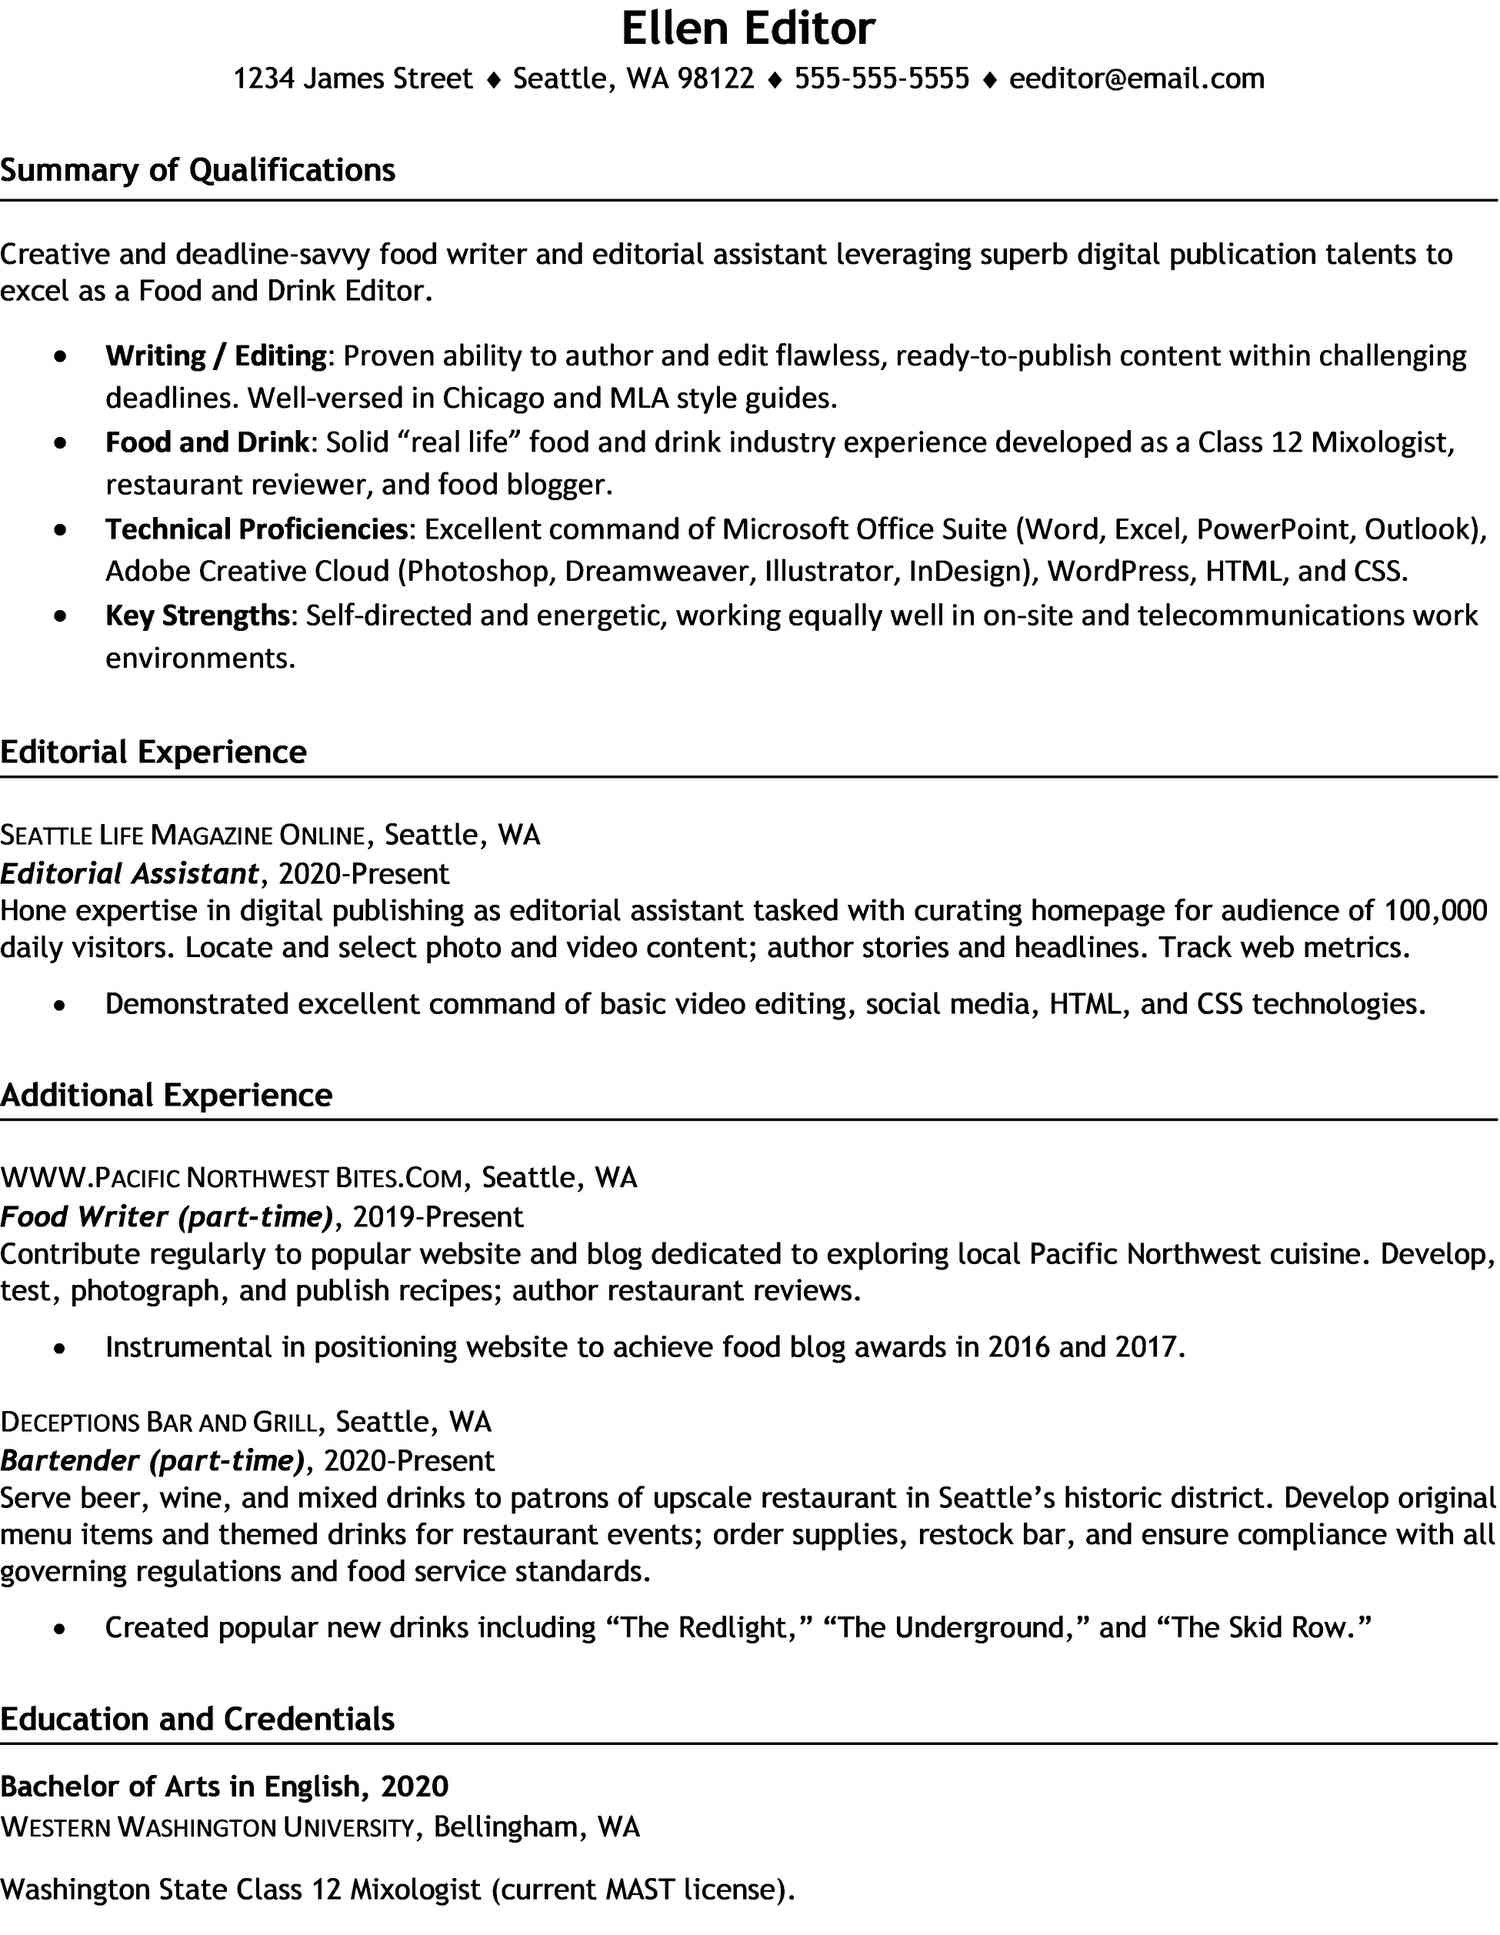 Sample Resume with Full and Part Time Experience How to Include Part-time Work On A Resume